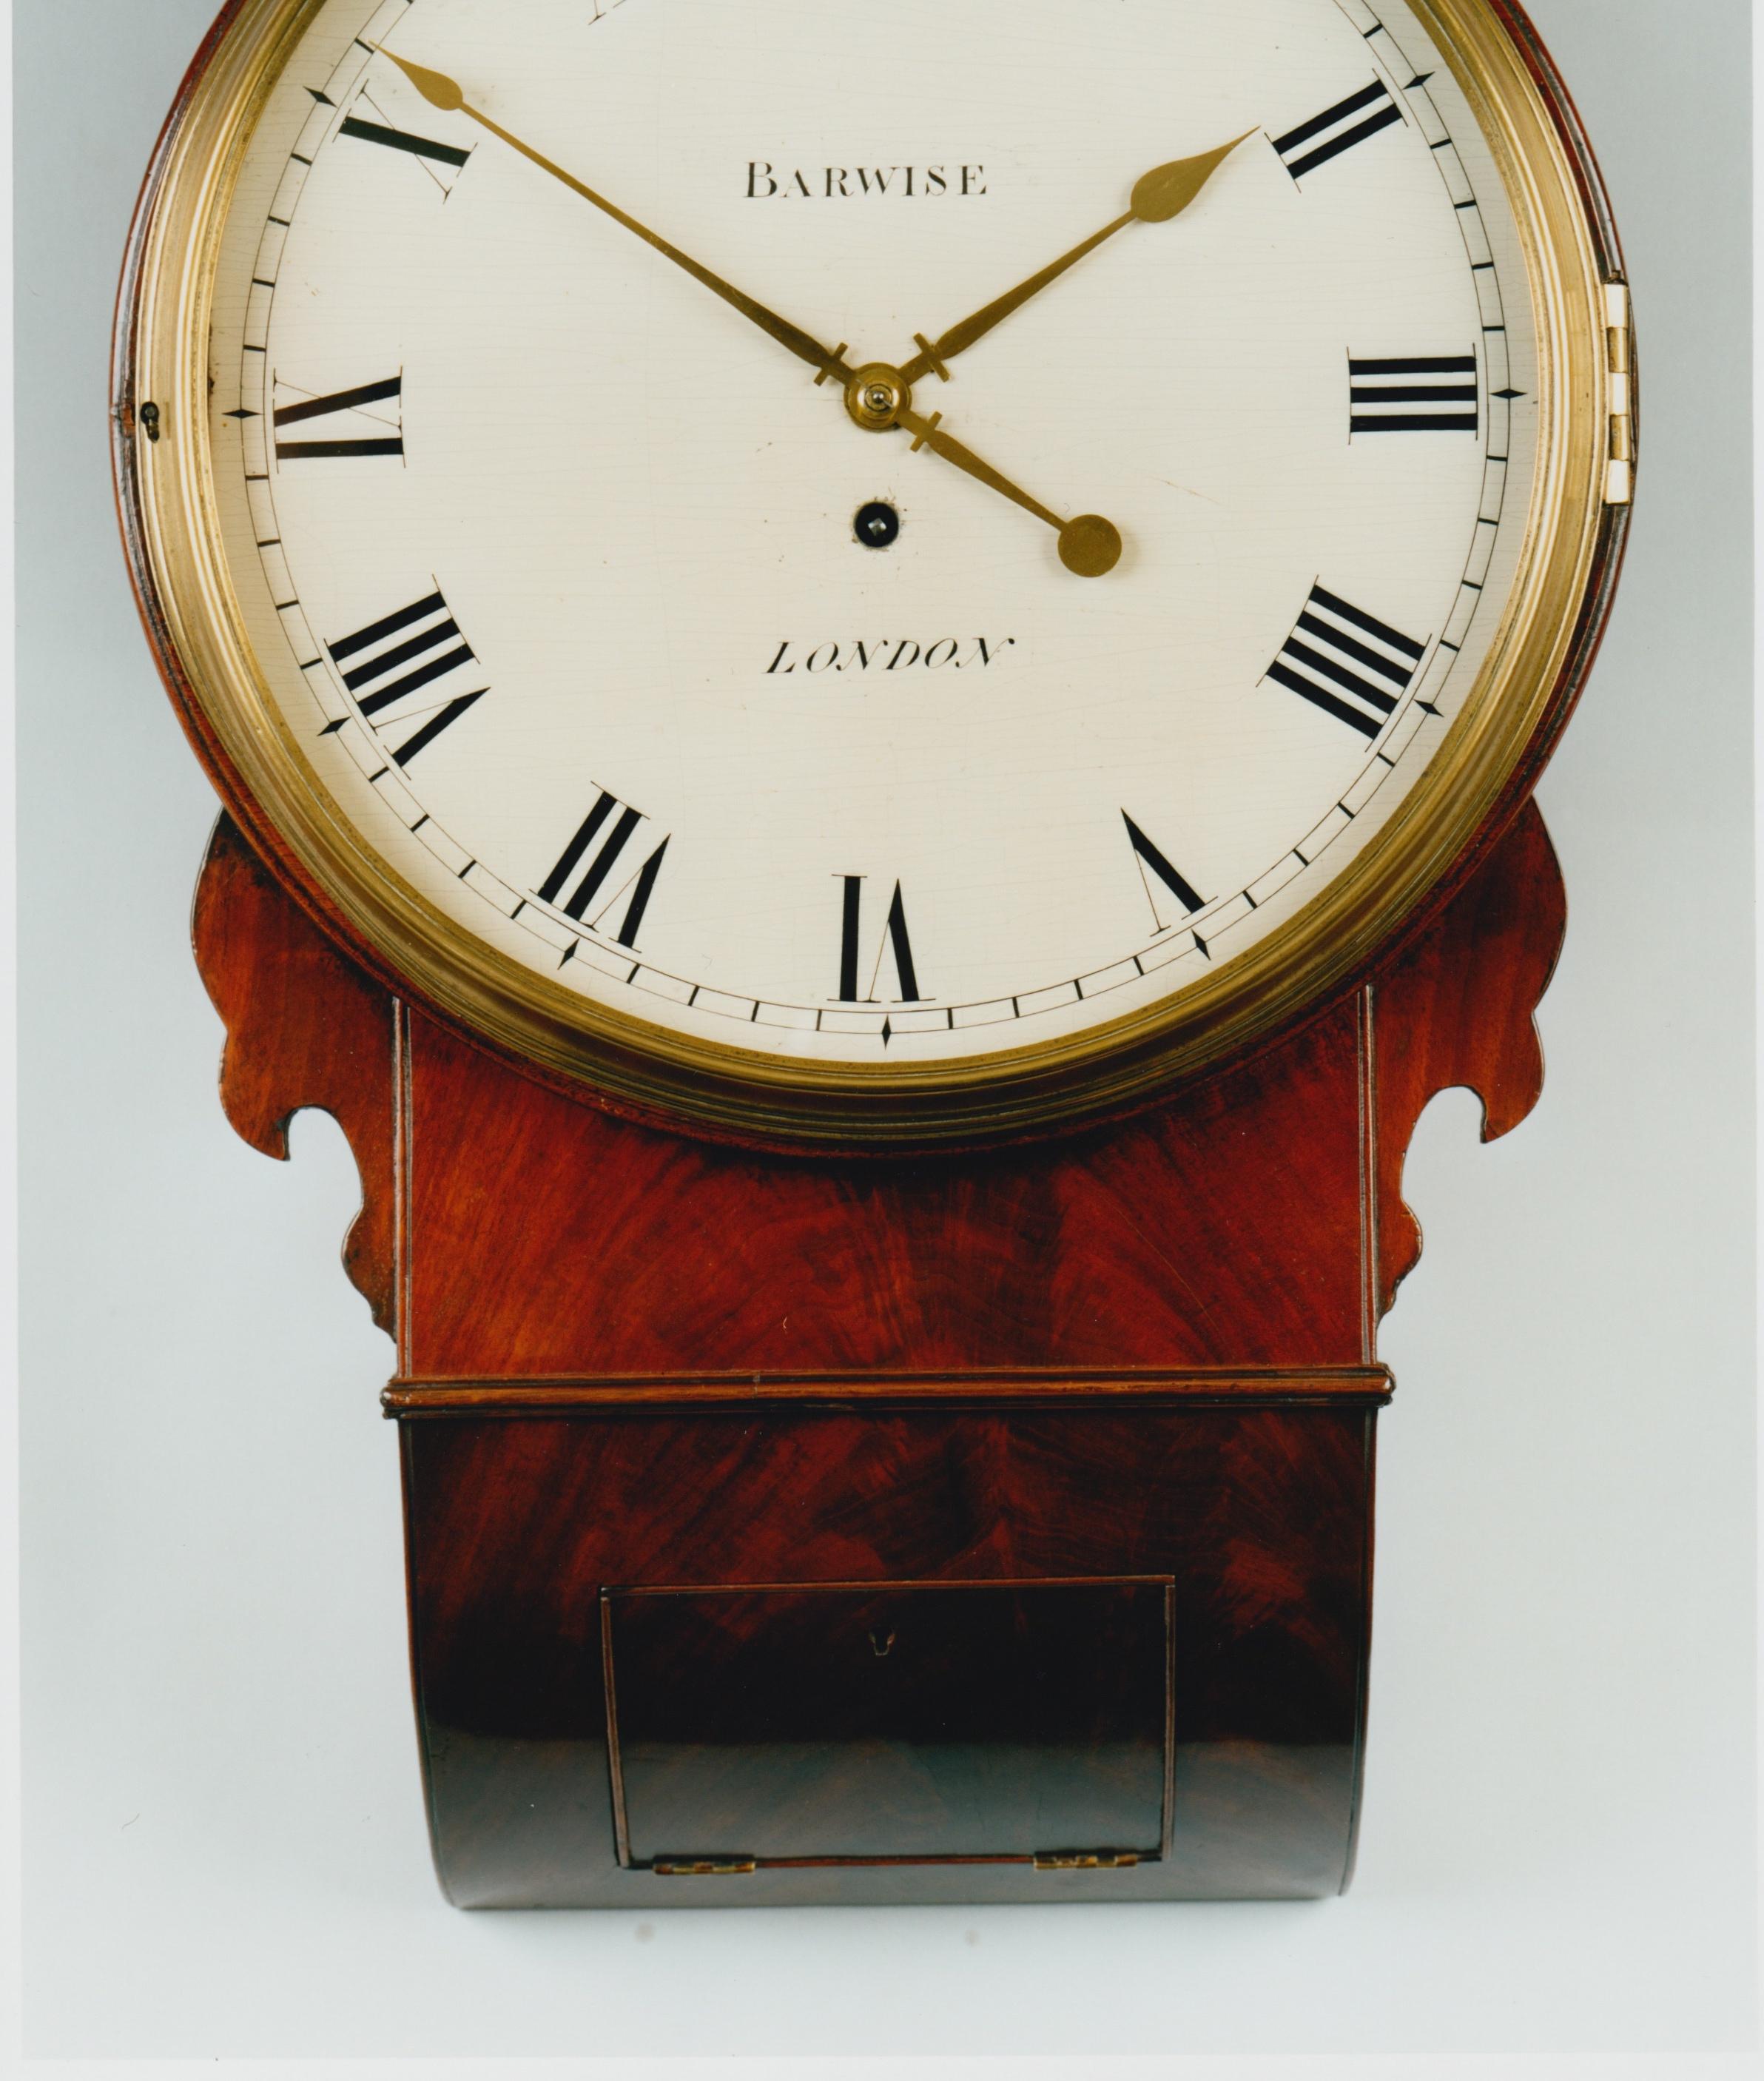 A fine quality early 19th century mahogany wall drop dial timepiece by this prestigious family of clockmakers. The fully signed white painted wooden 12 inch dial retains its original crackelure surface and gilt brass hands, the minute hand with